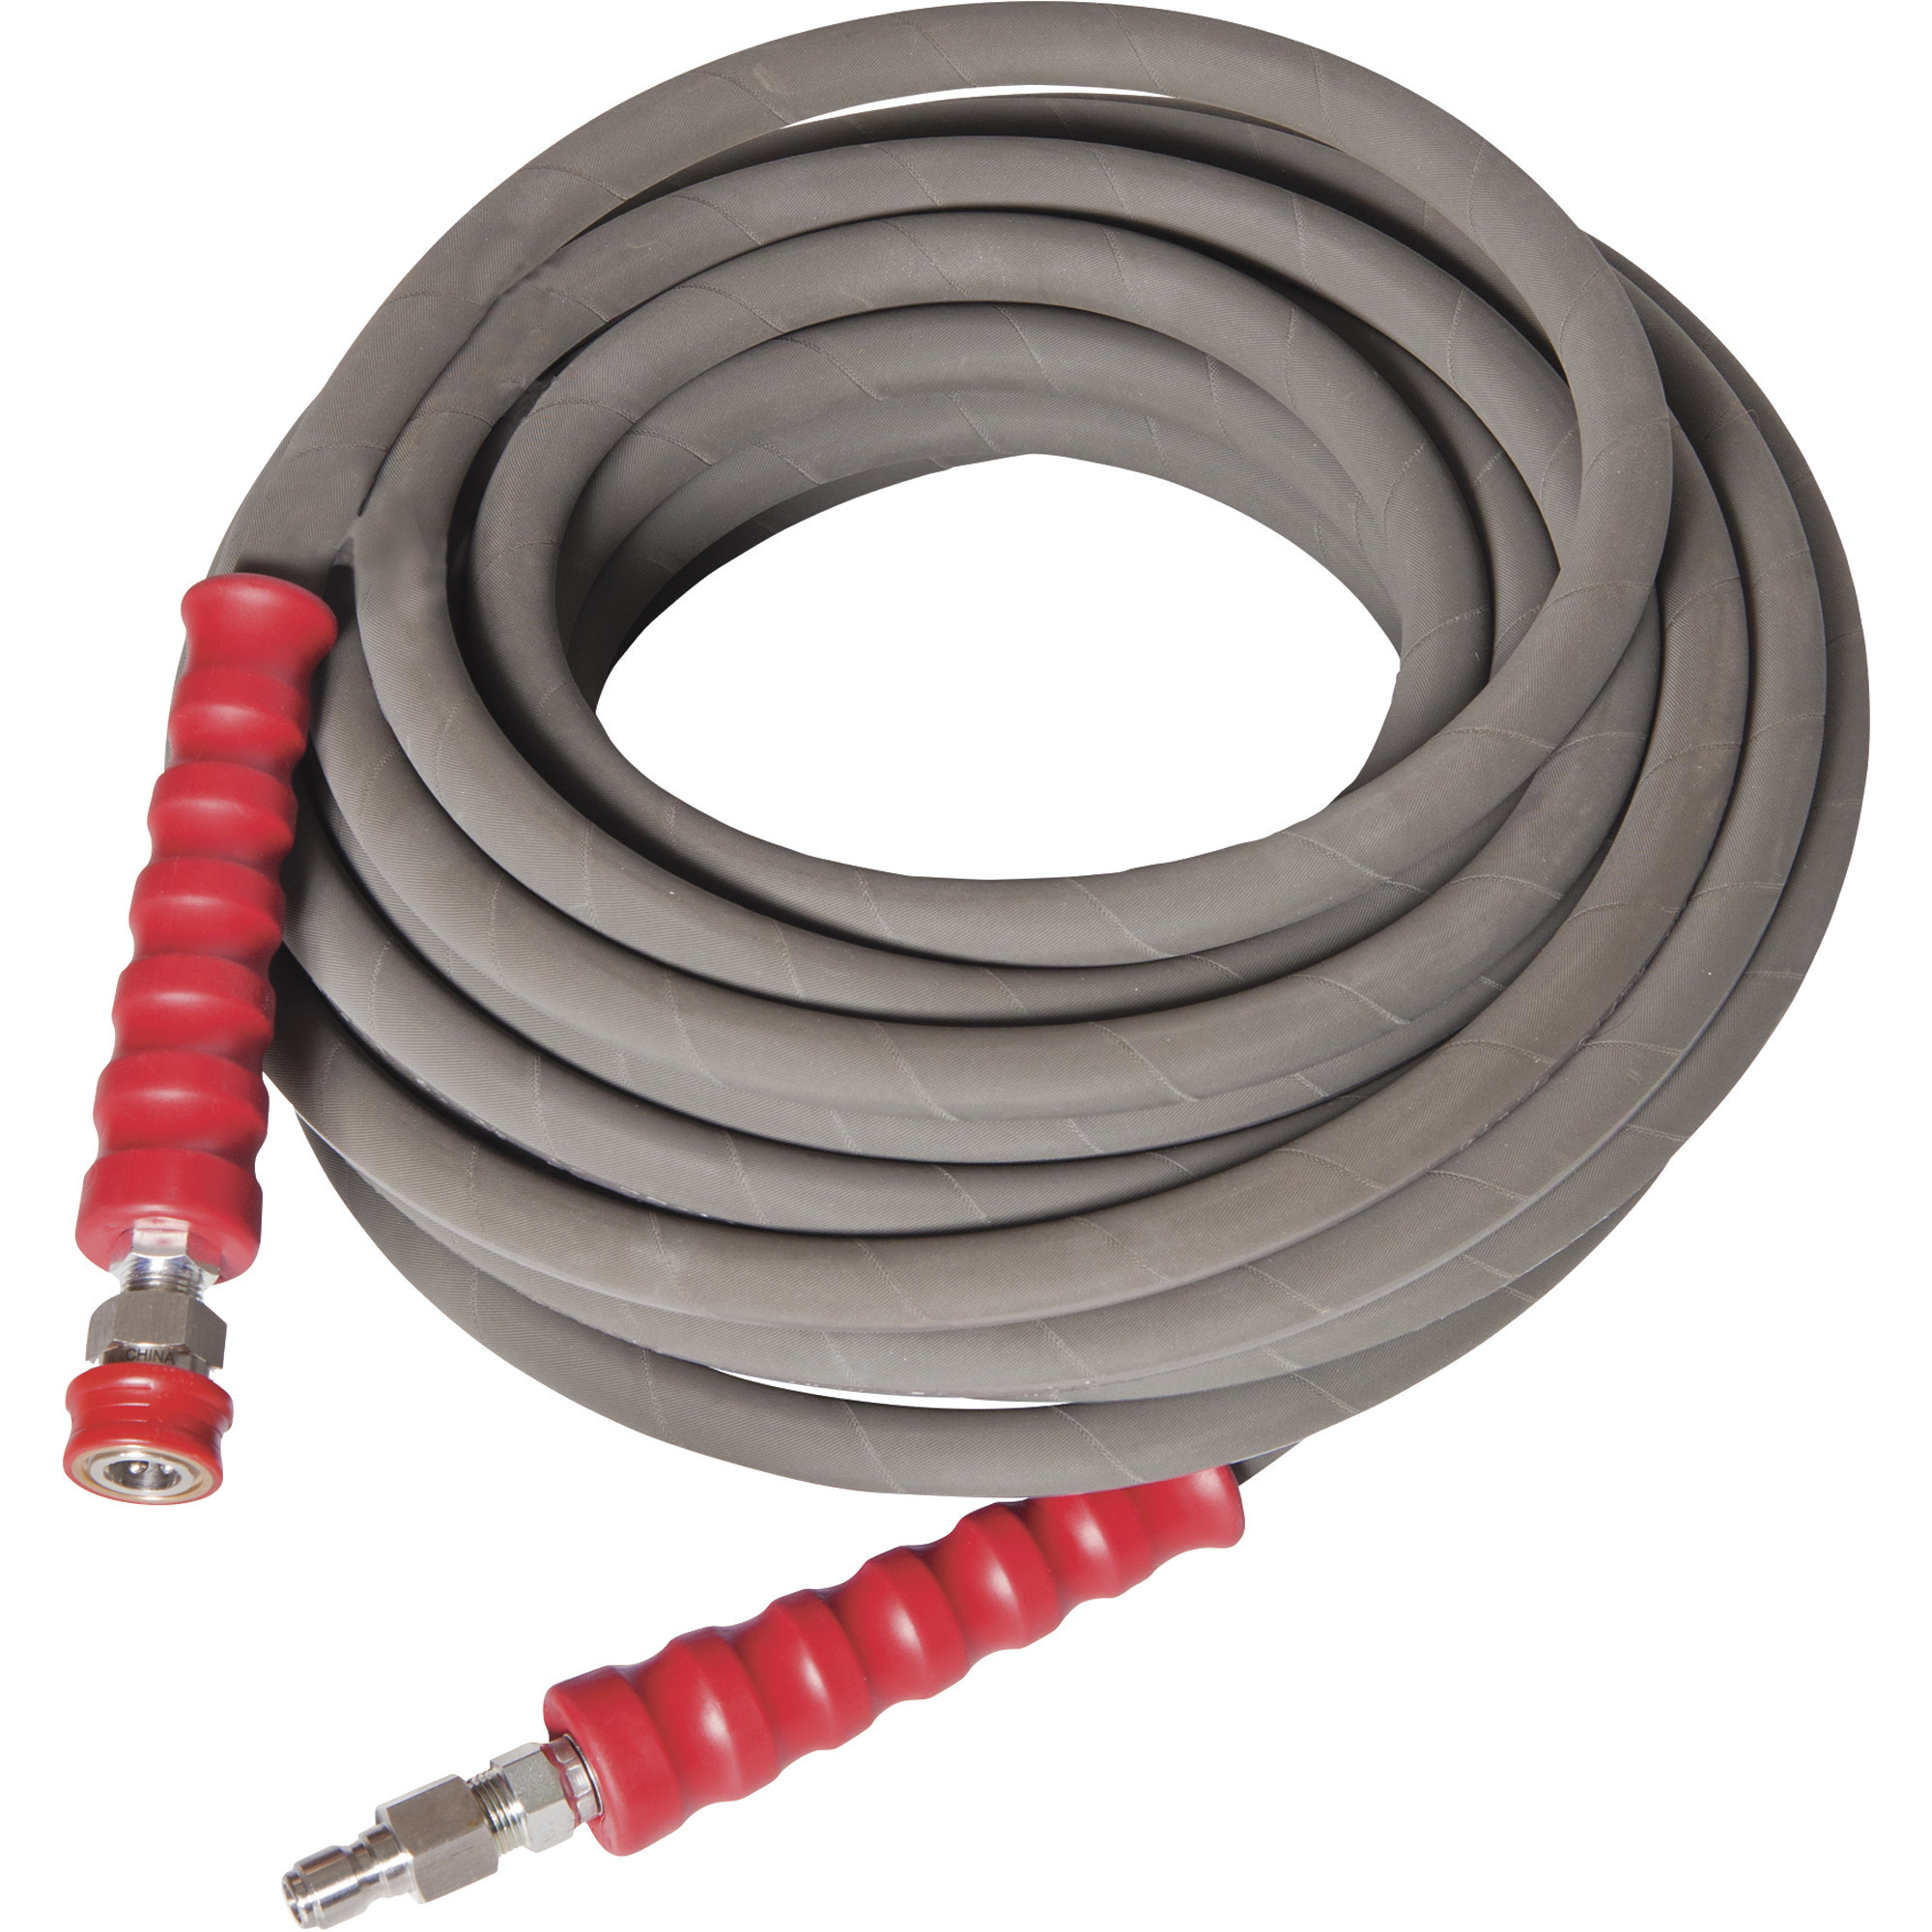 NorthStar Hot Water Nonmarking Pressure Washer Hose, 6000 PSI, 50ft. x 3/8Inch, Model 989401984